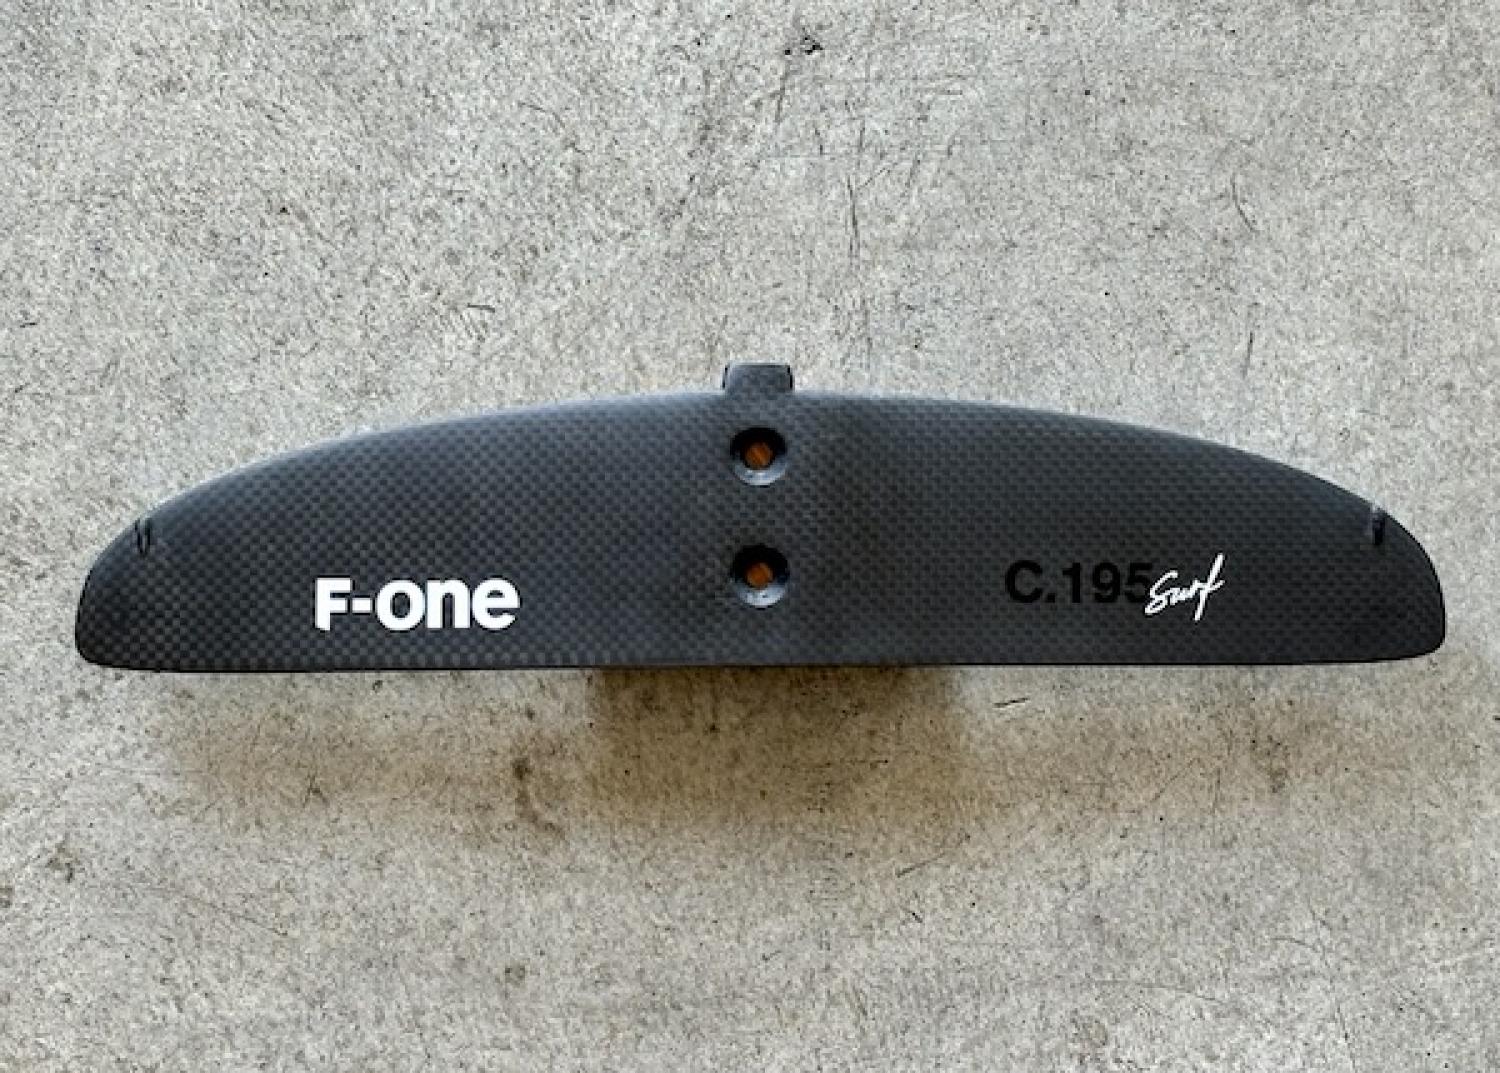 USED F-ONE STAB C195 SURF